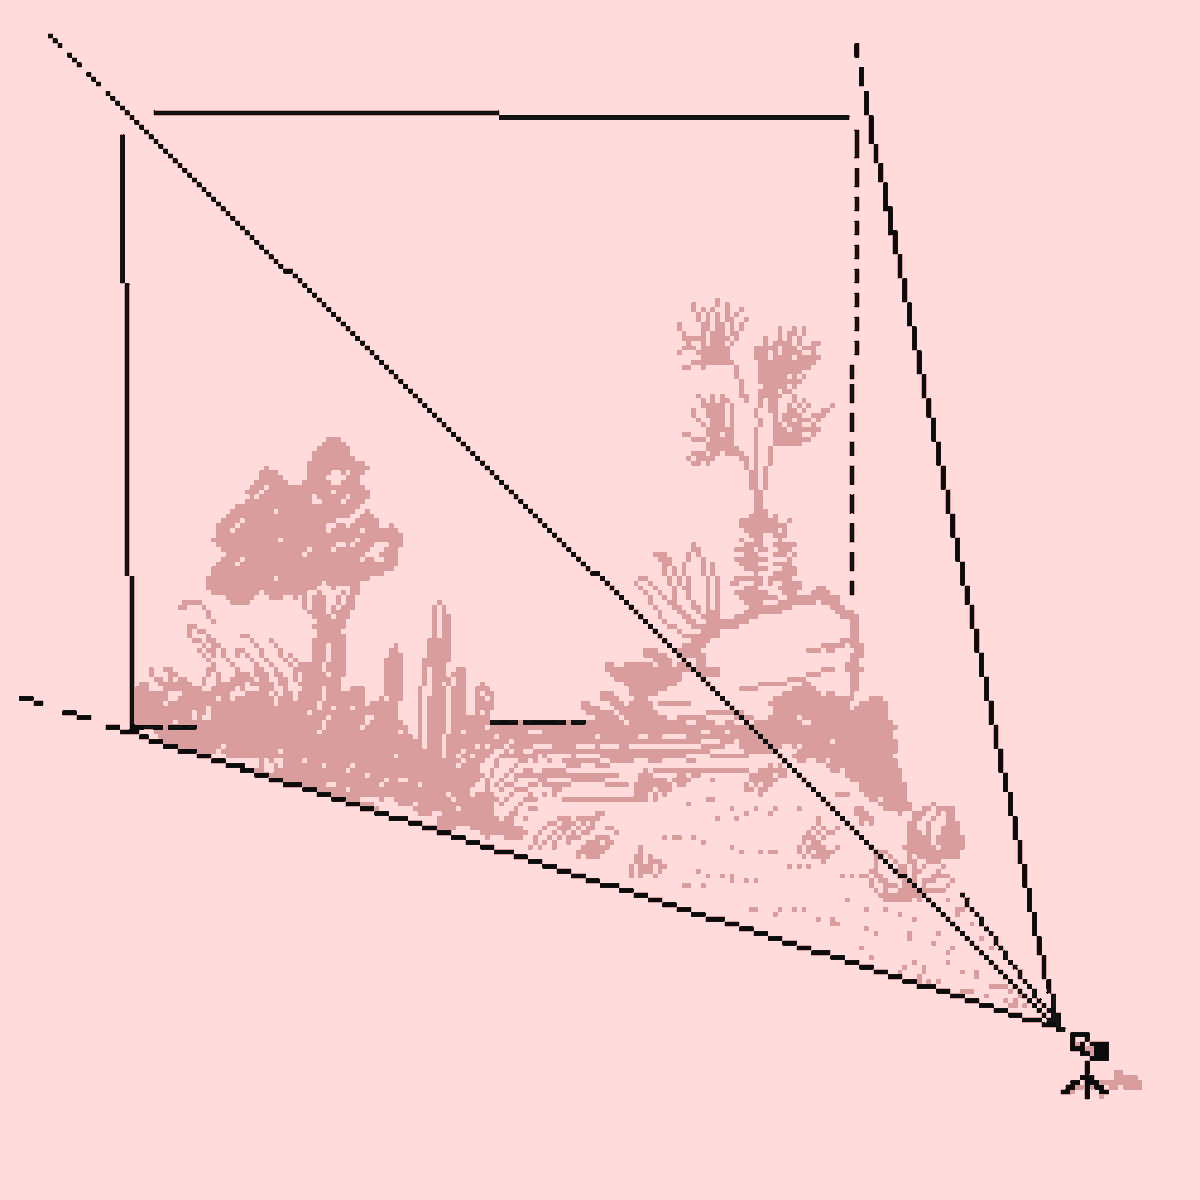 Frustum Culling Garden
250×250p

Frustum Culling is an optimizing technique used in computer games that only generate the assets within the player's viewing frustum, while the rest of the world remains void. ...